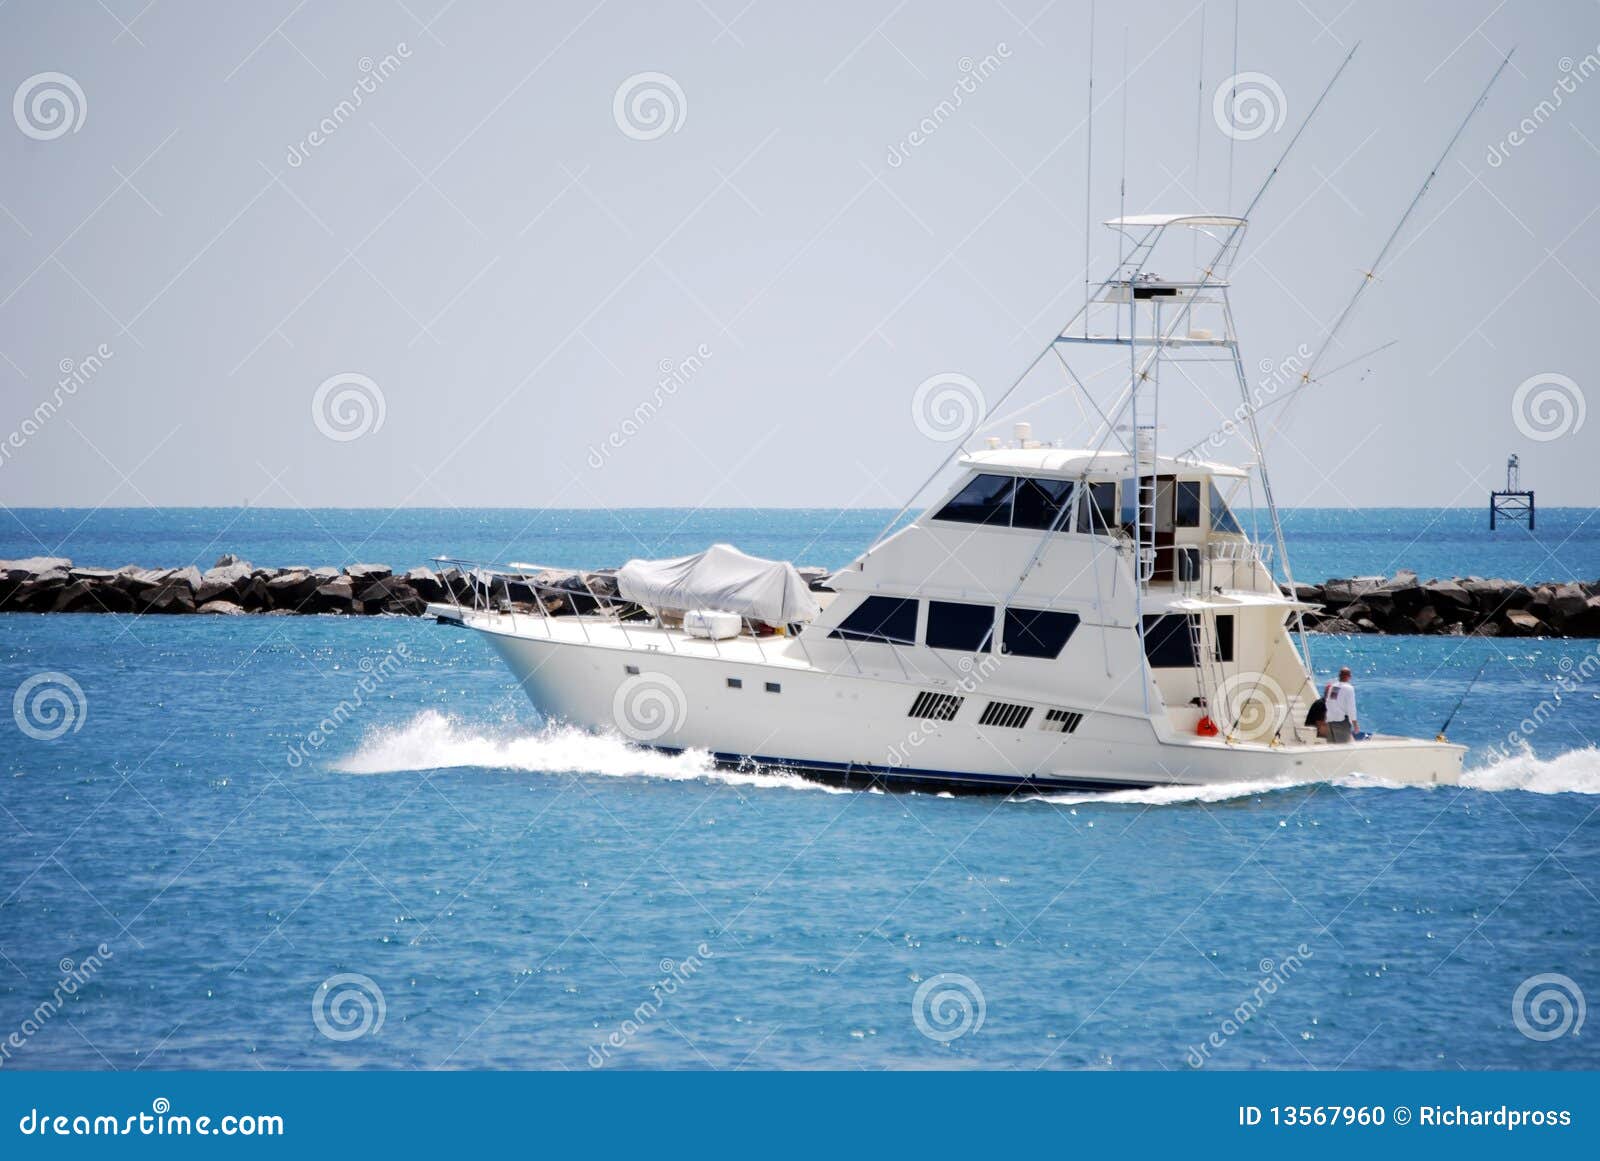 Charter Sport Fishing Boat Heading Out To Sea Stock Photo - Image 